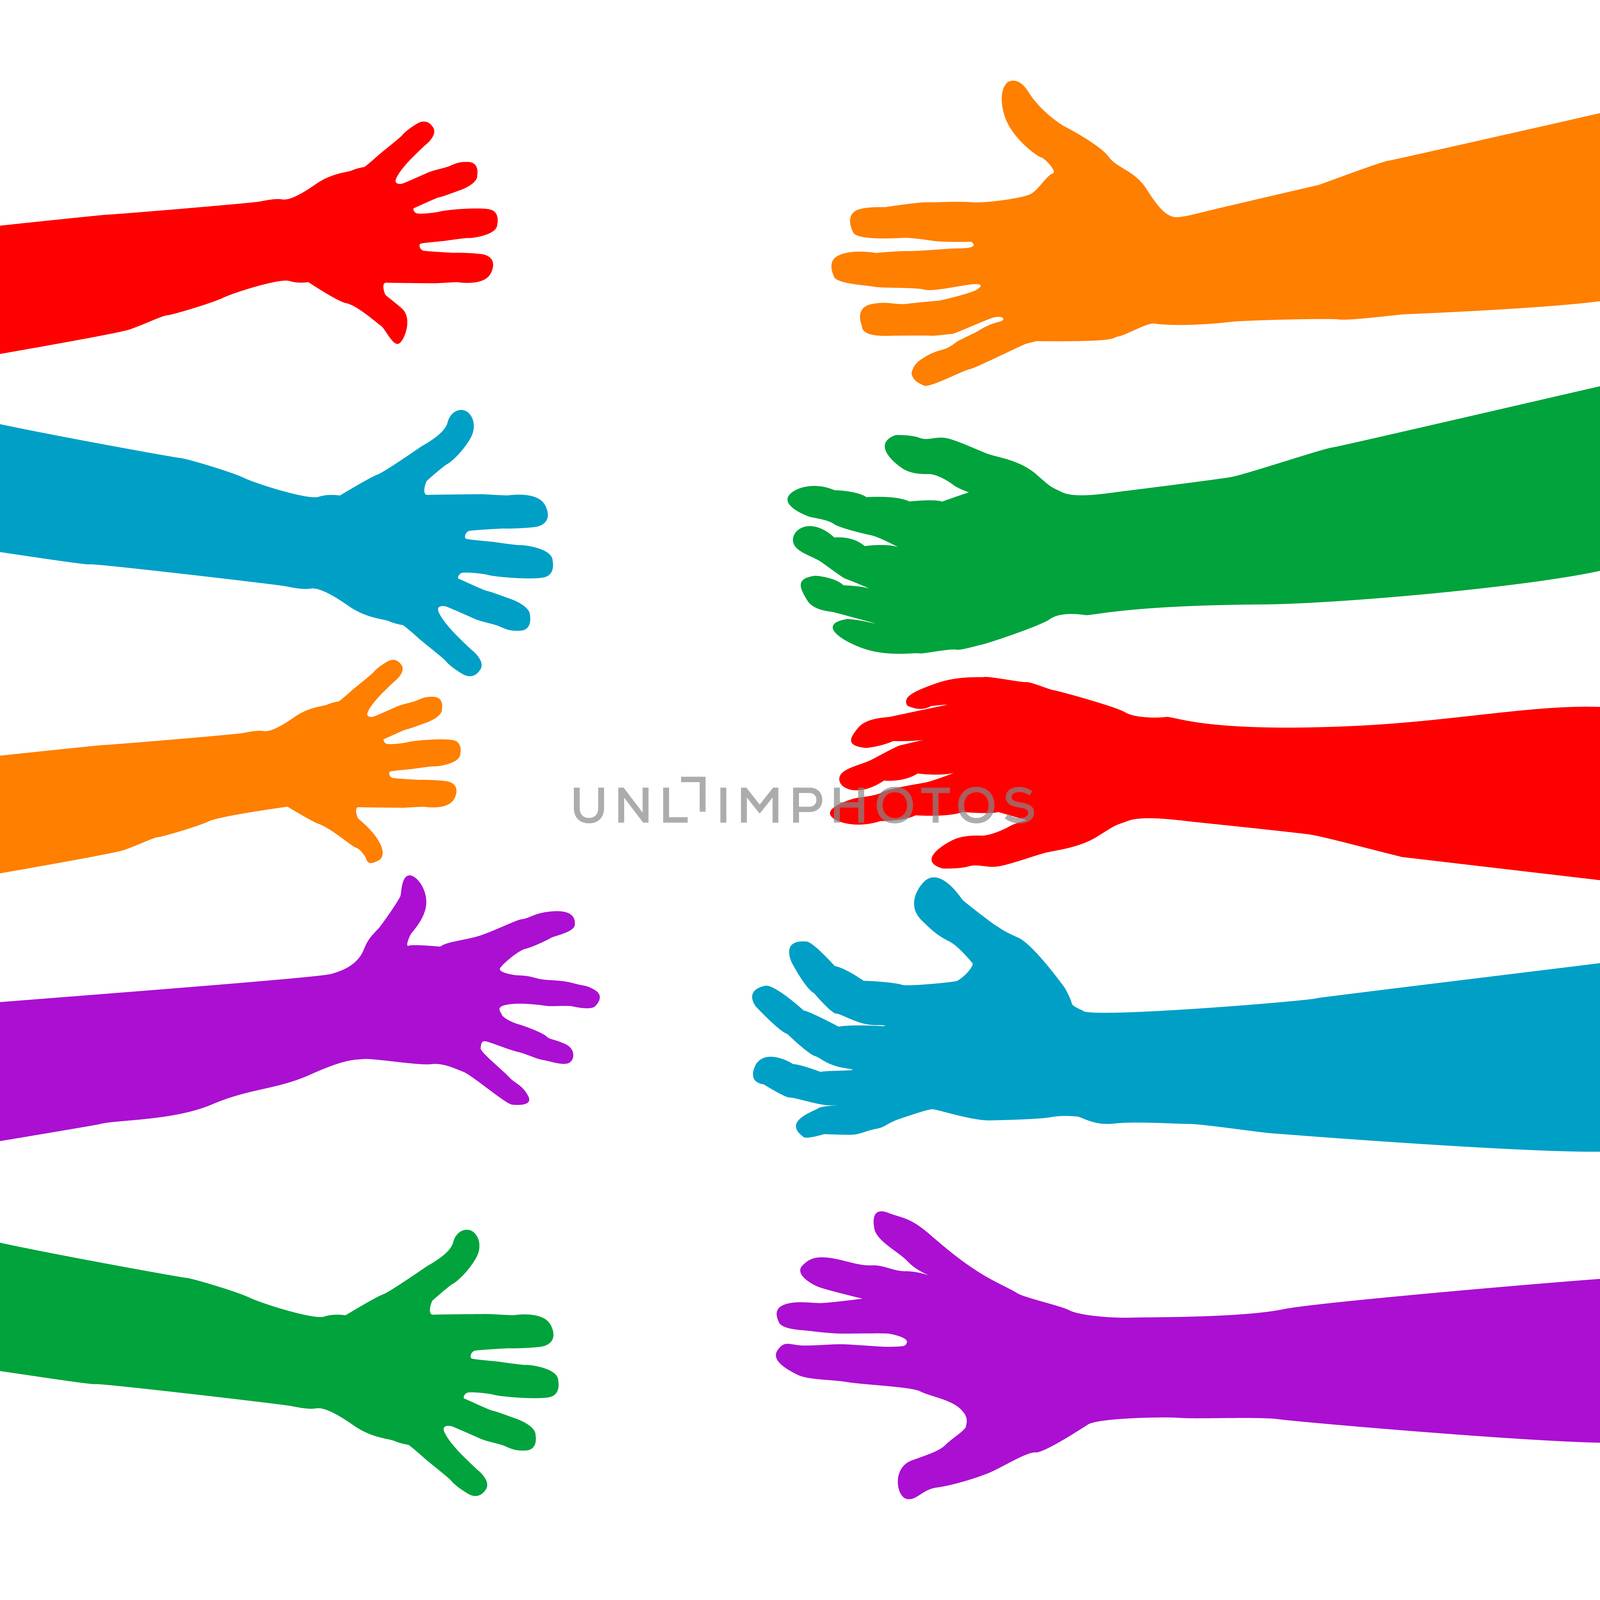 Adults care about children concept with colorful hands silhouett by hibrida13